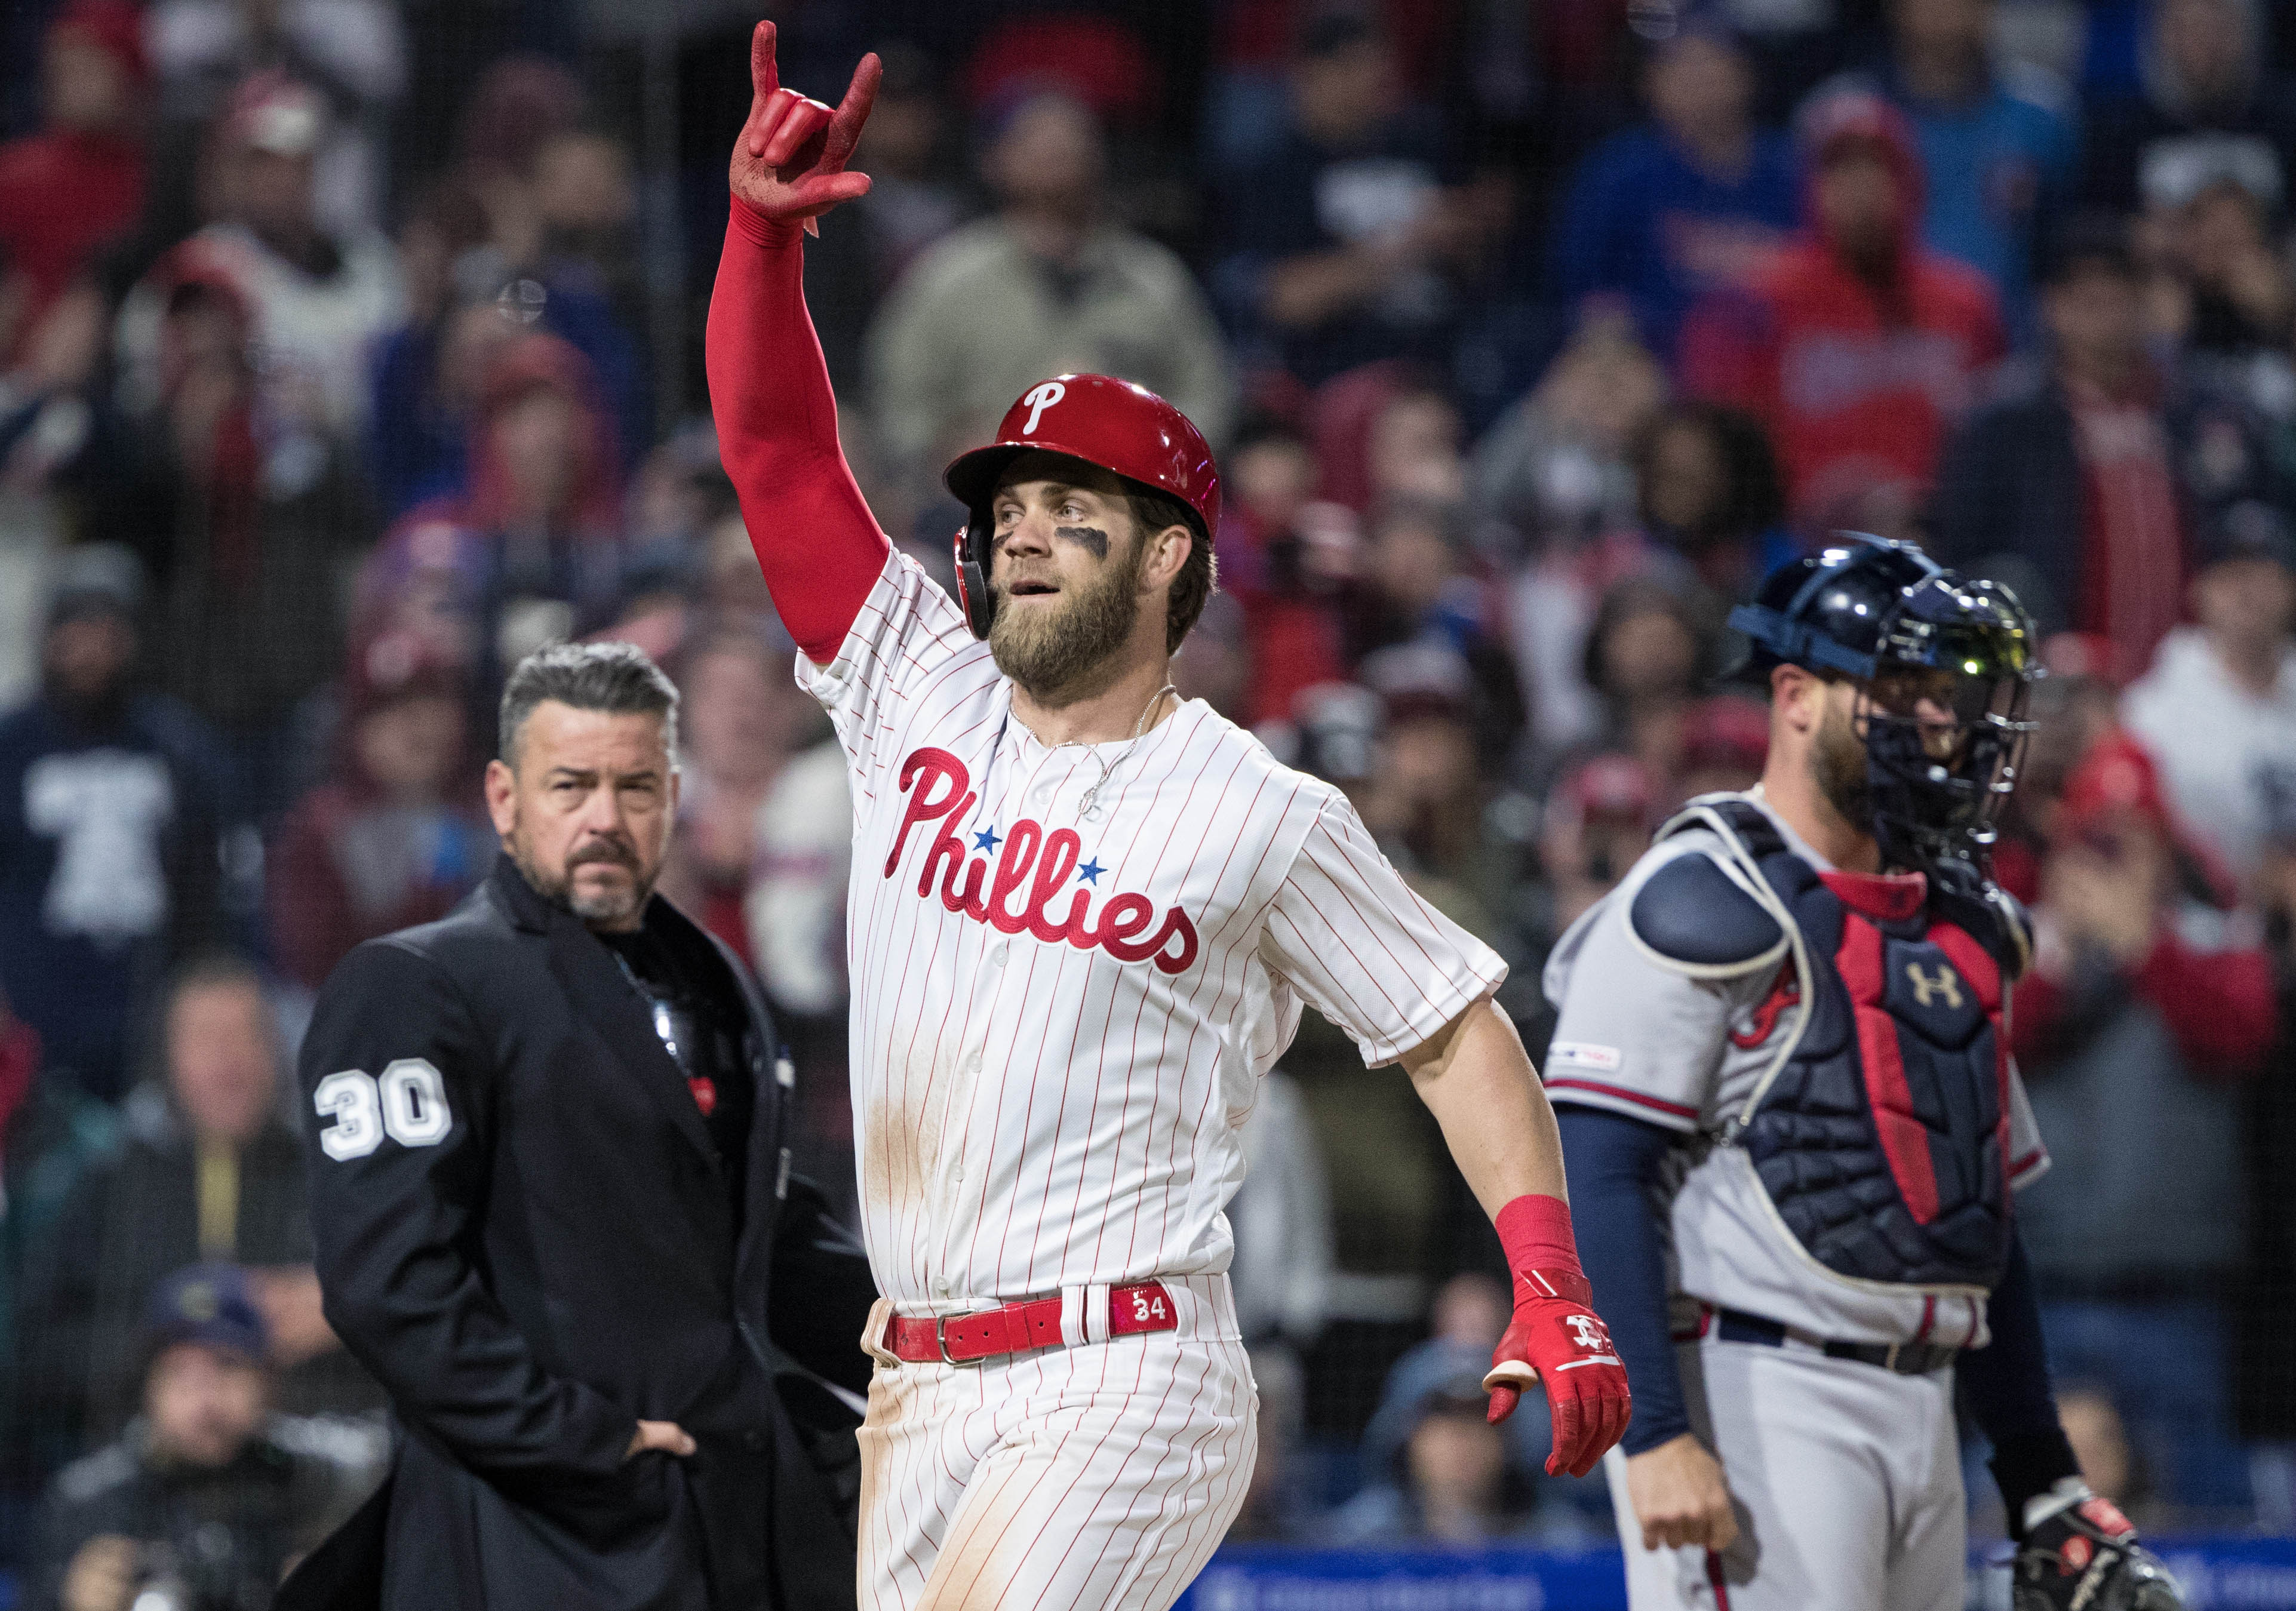 For the First Time in Six Seasons, Meaningful Baseball was Played at Citizens Bank Park